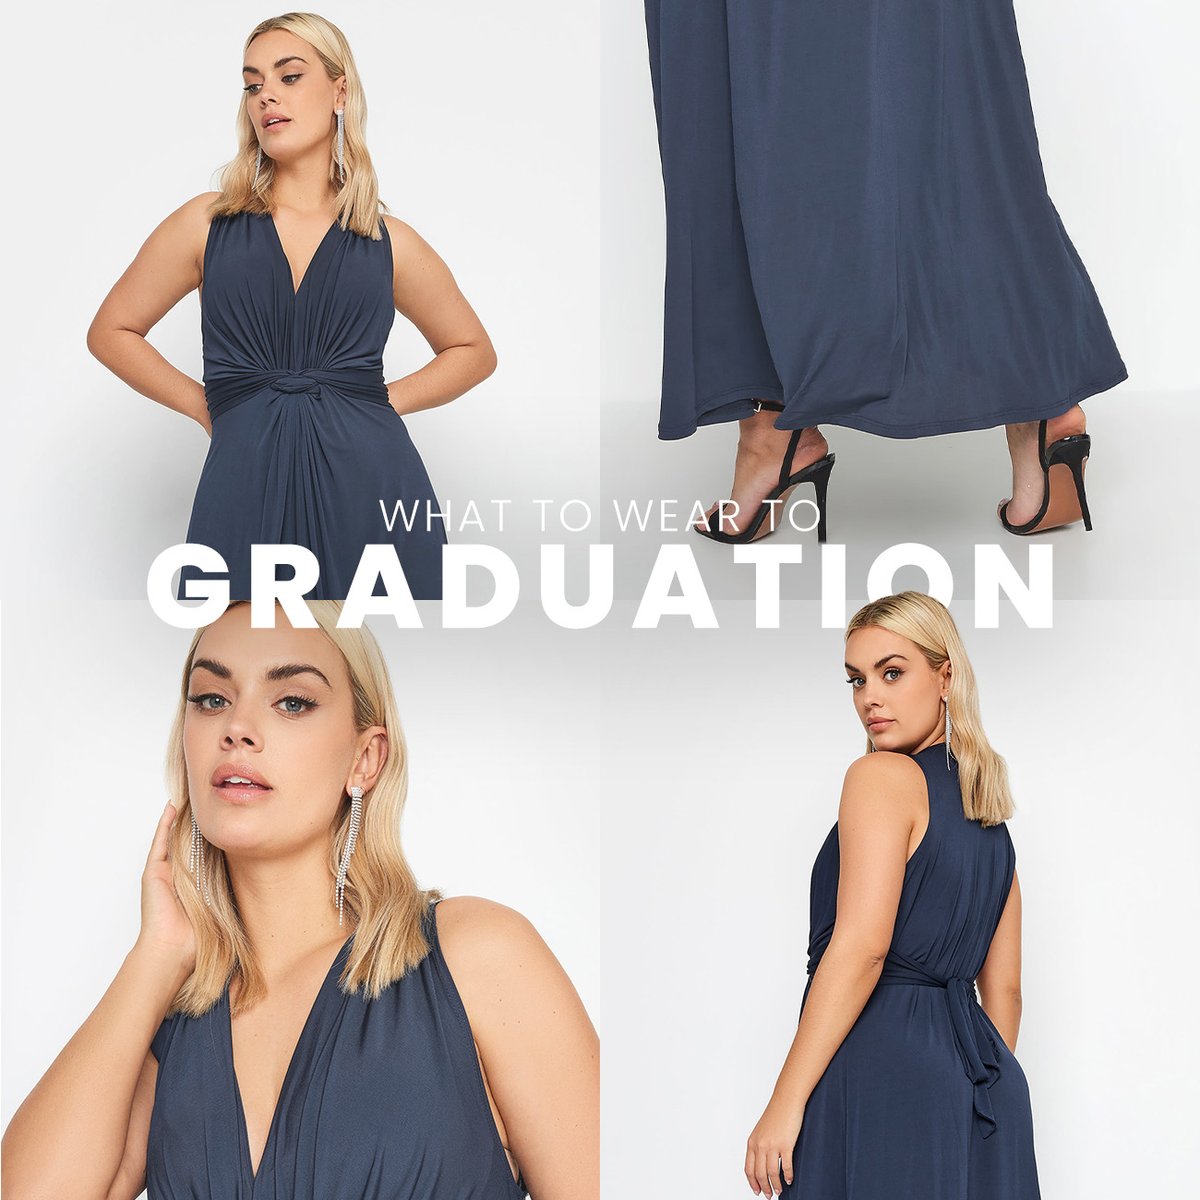 Graduation coming up?🎓 Check out our blog for what to wear to a graduation ceremony and celebrate in style✨👉 bit.ly/3PYiPTY